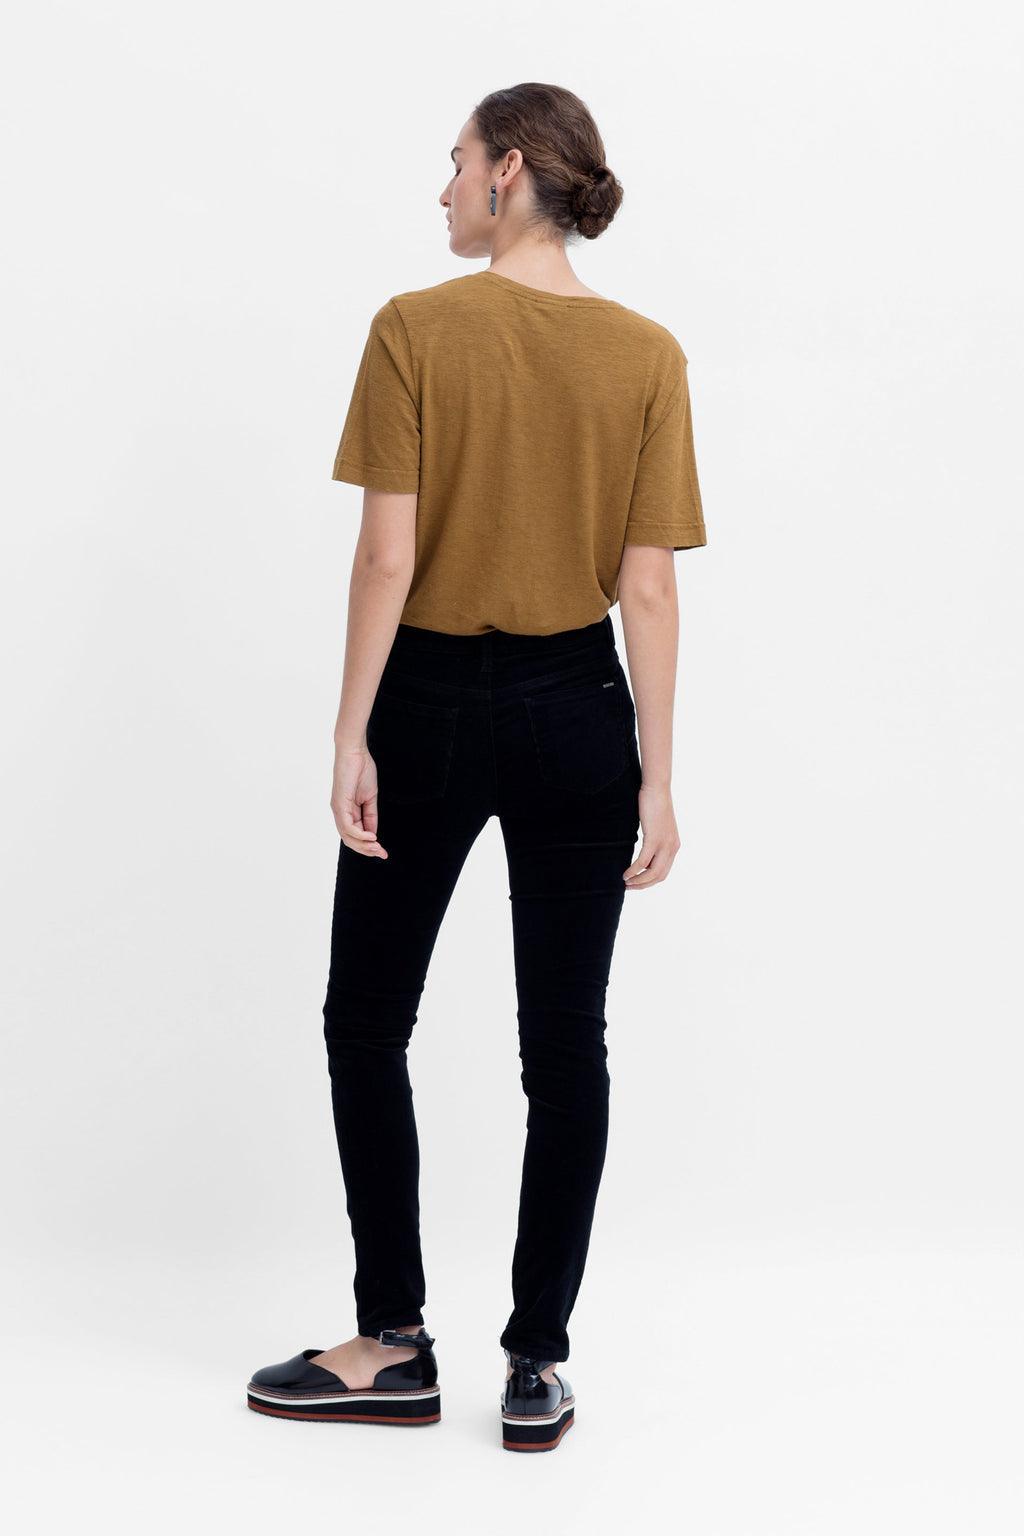 Elk- Vand Black Cord Jeans from Outline Clothing - Outline Clothing NZ